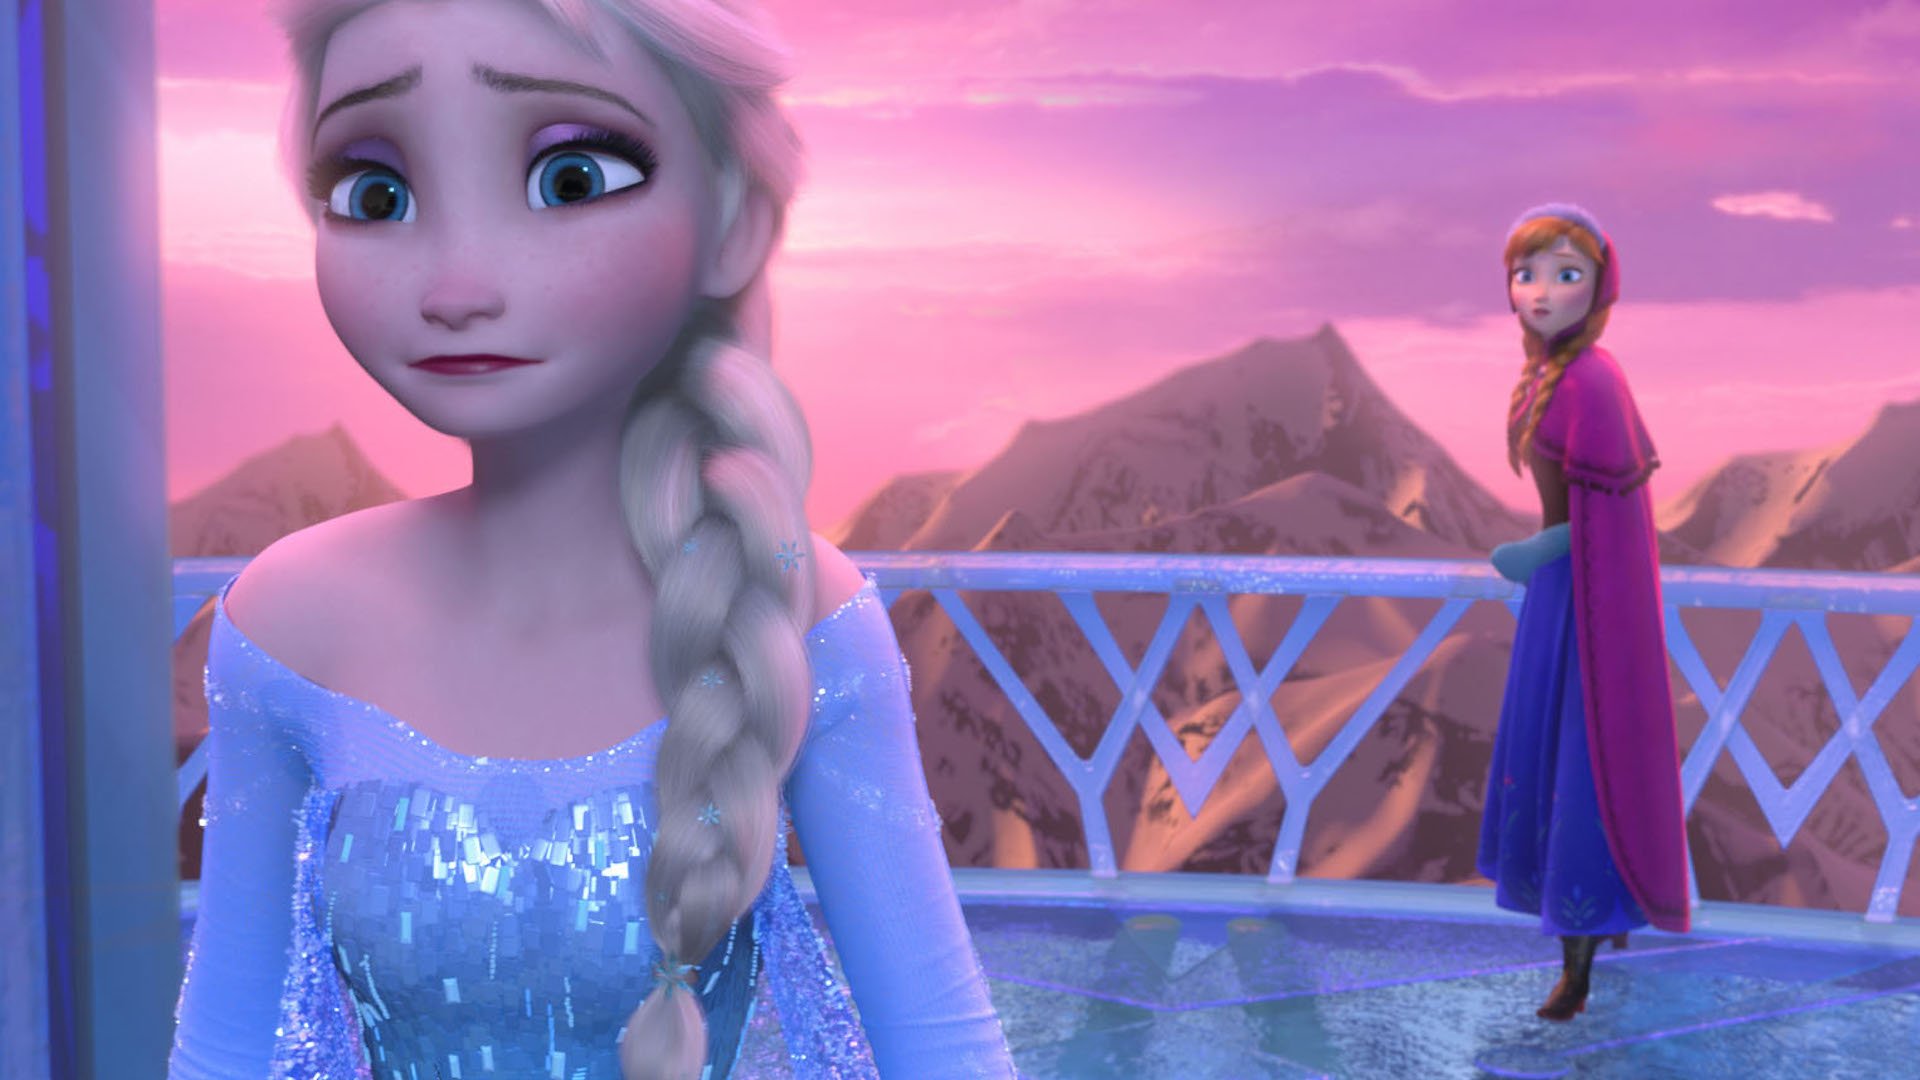 Elsa and her sister in Frozen